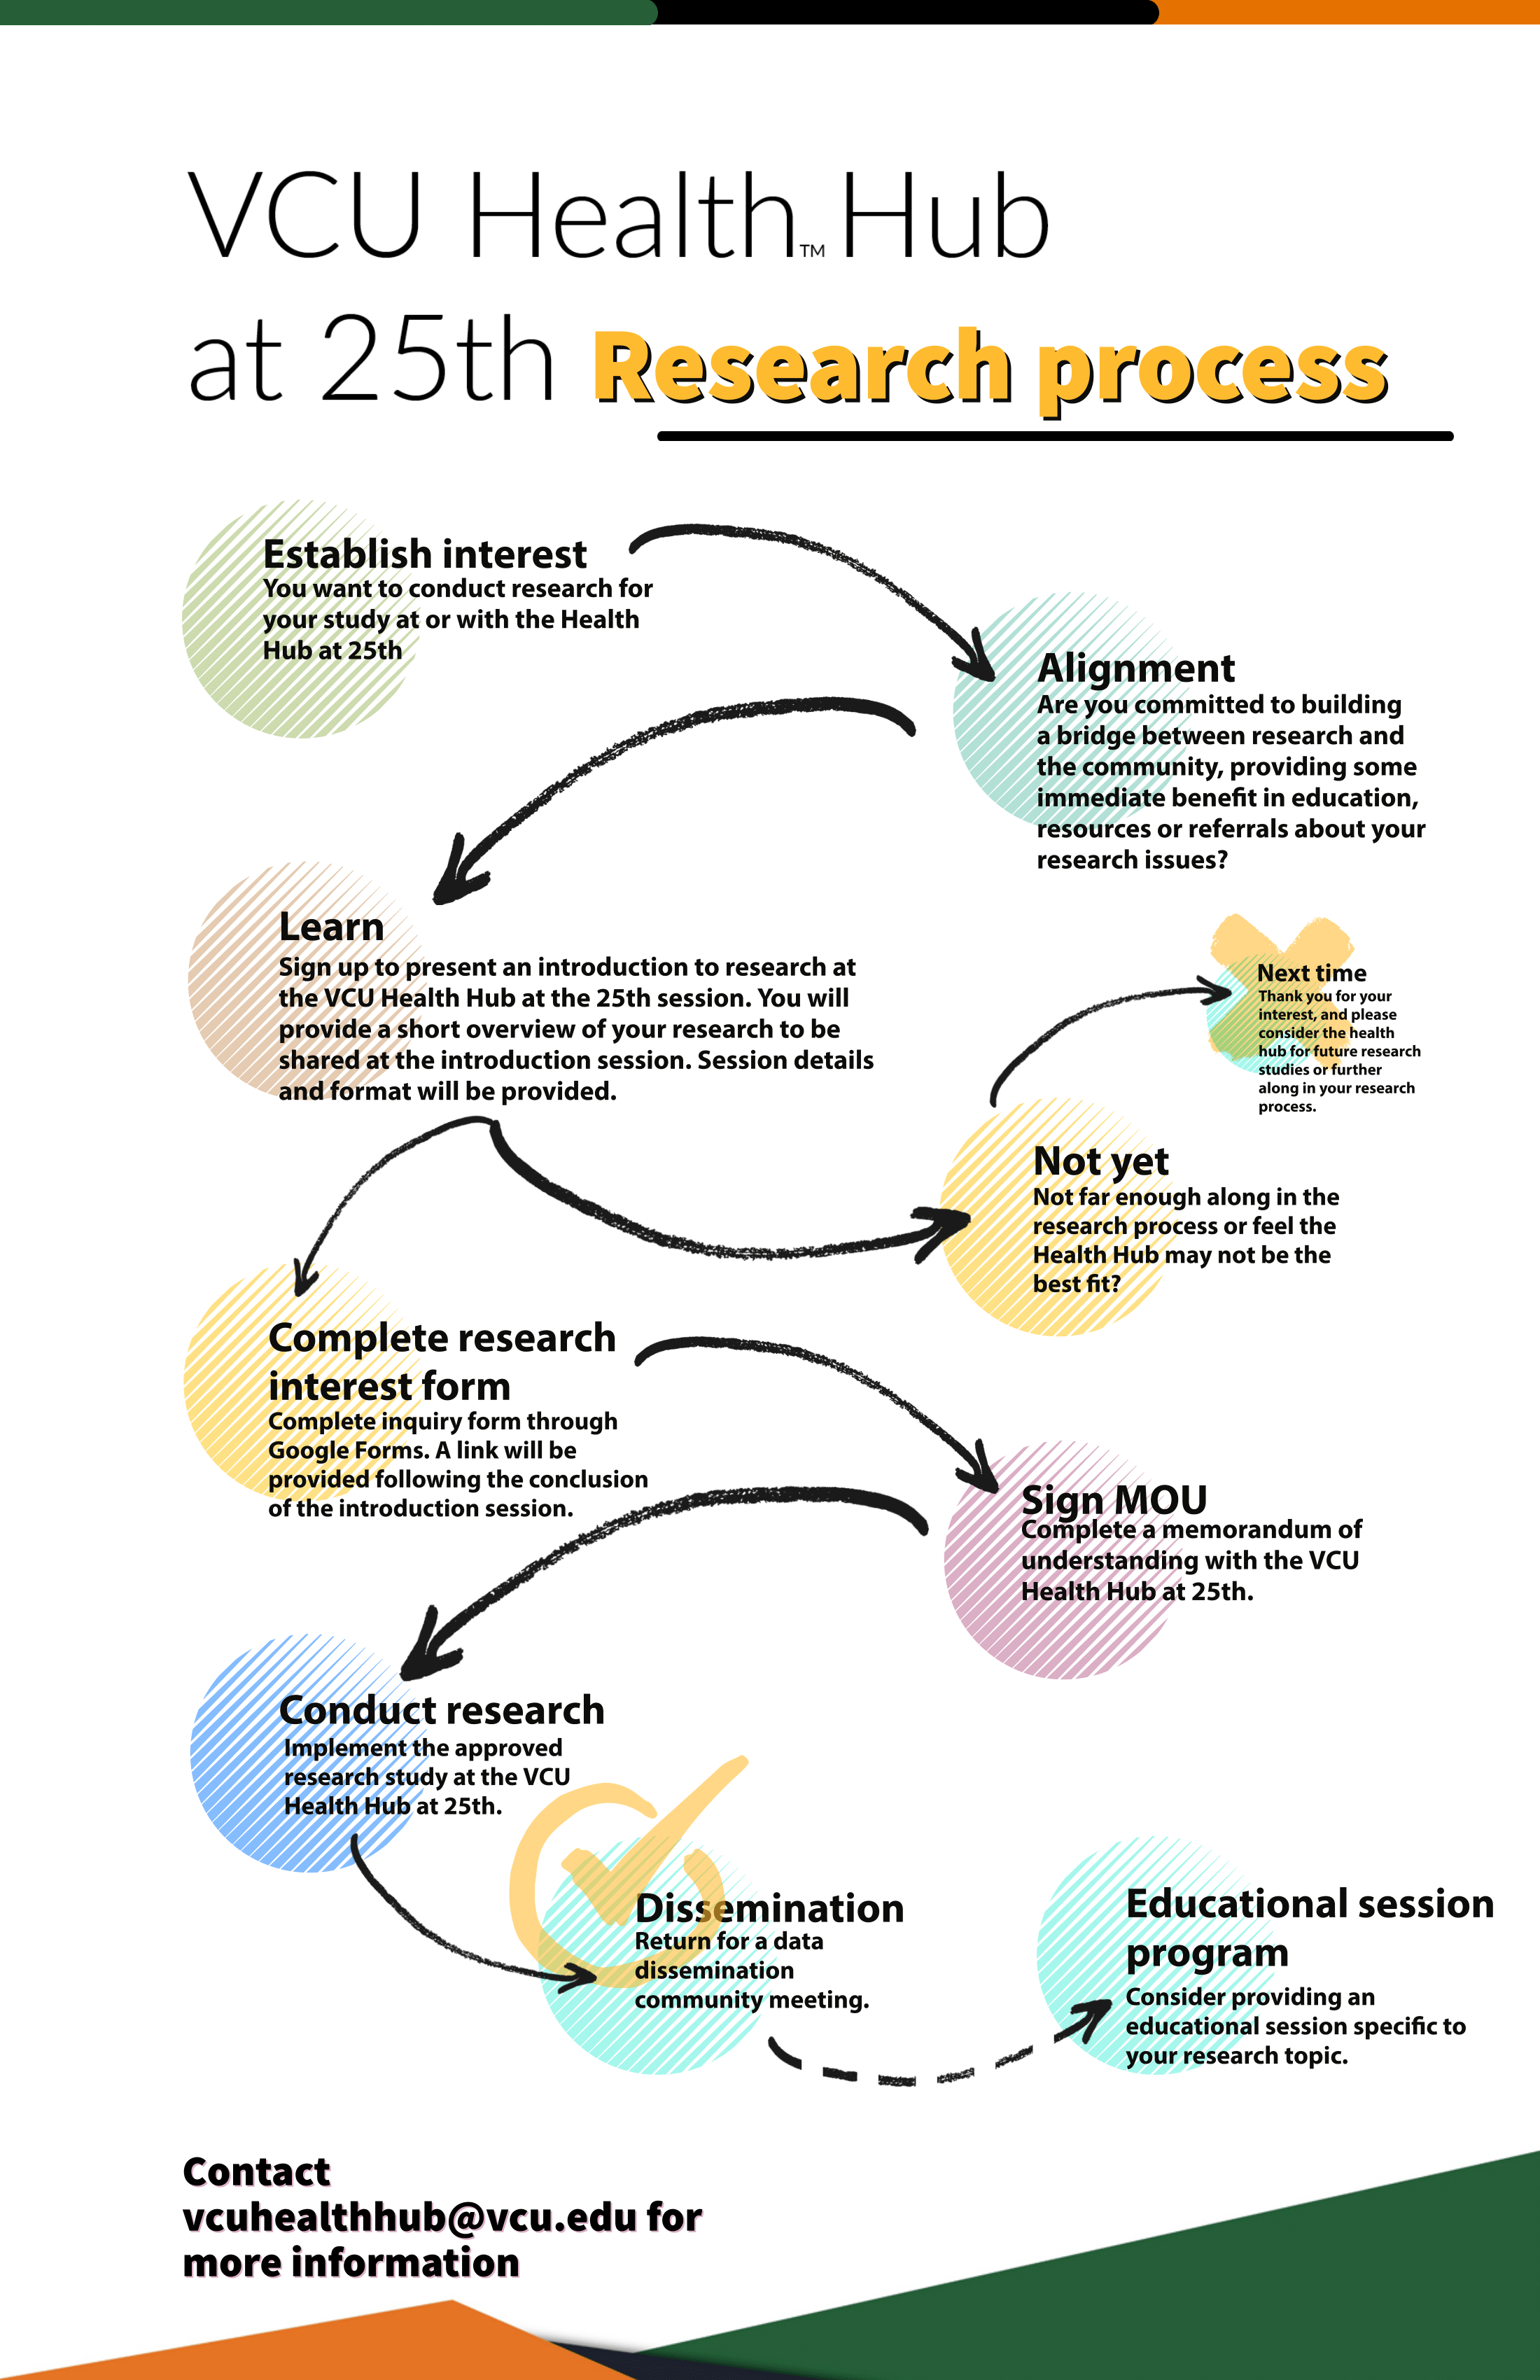 Infographic of the VCU Health Hub at 25th research process